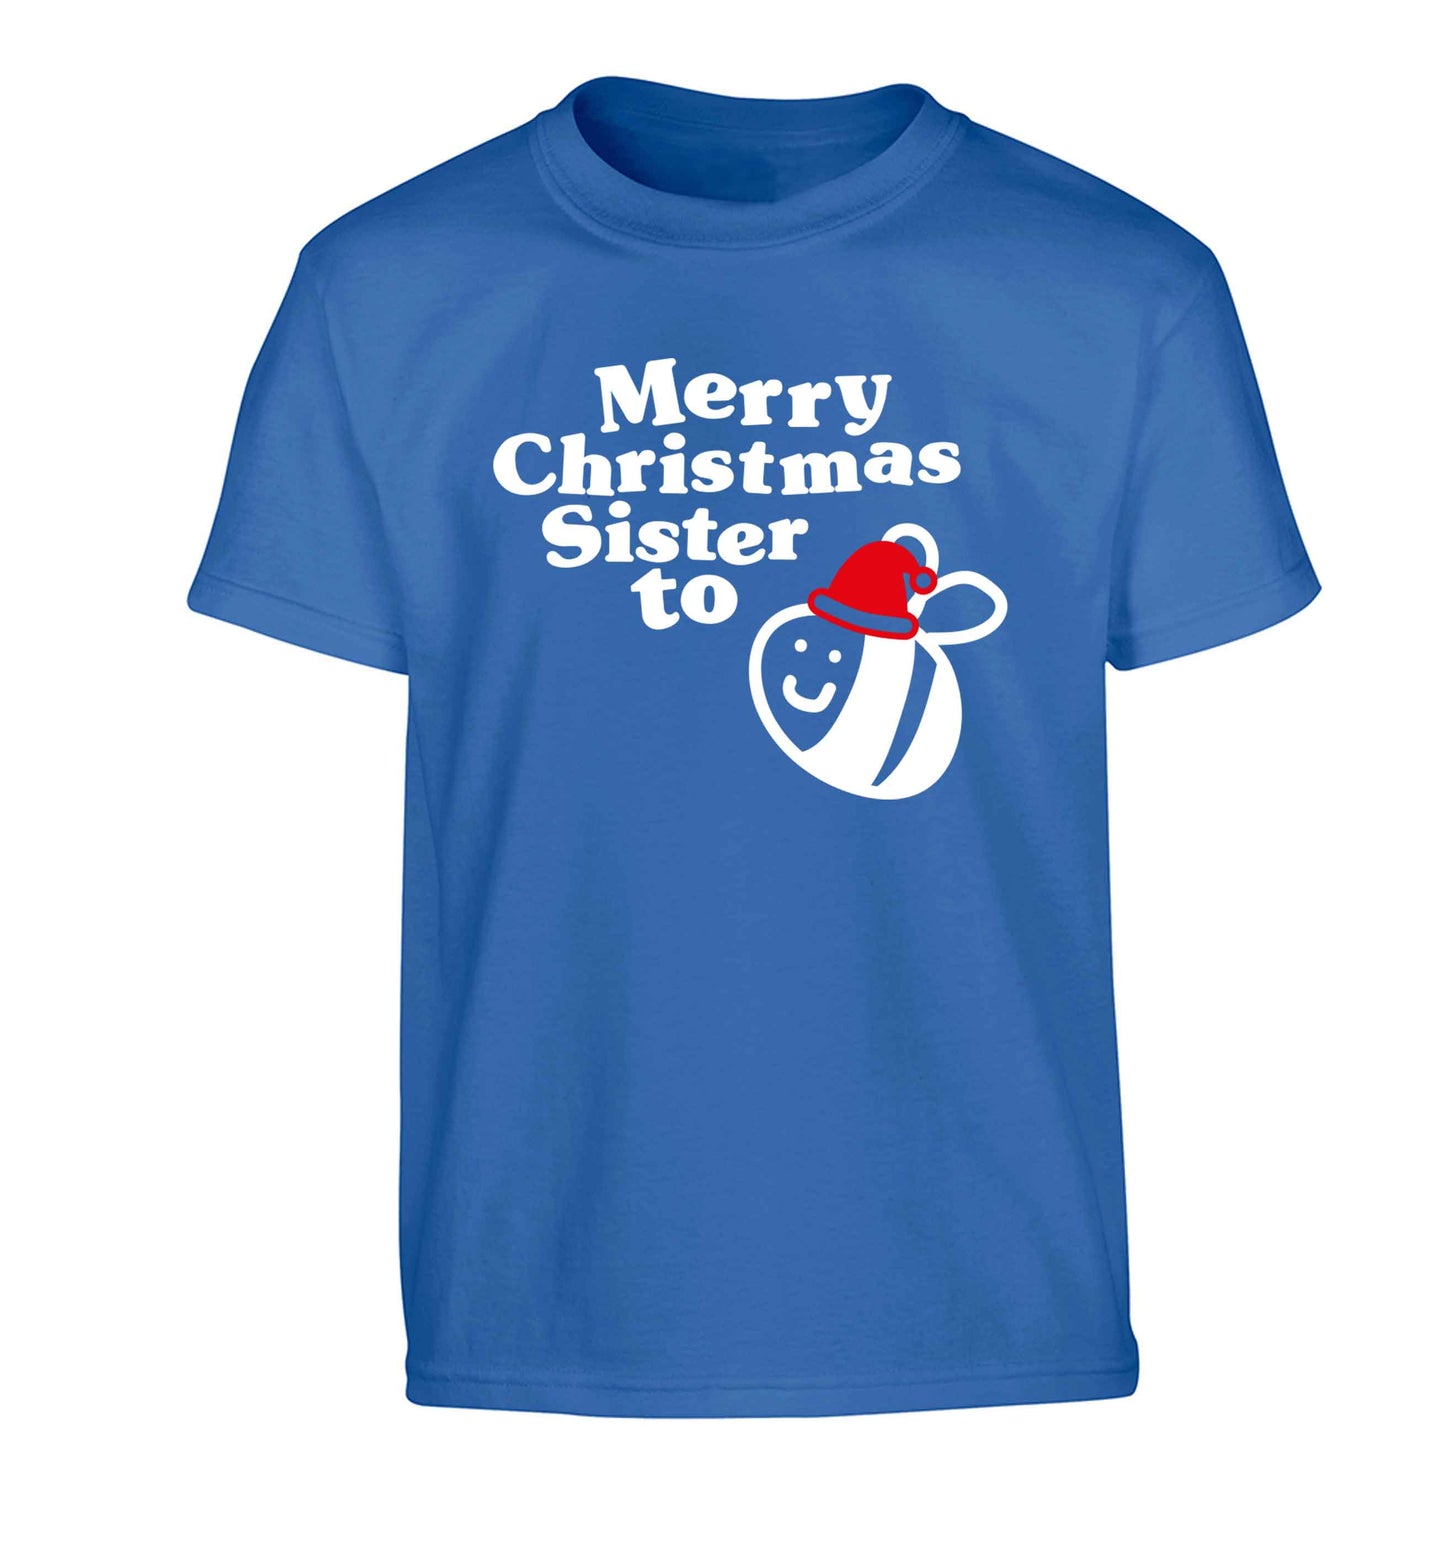 Merry Christmas sister to be Children's blue Tshirt 12-13 Years